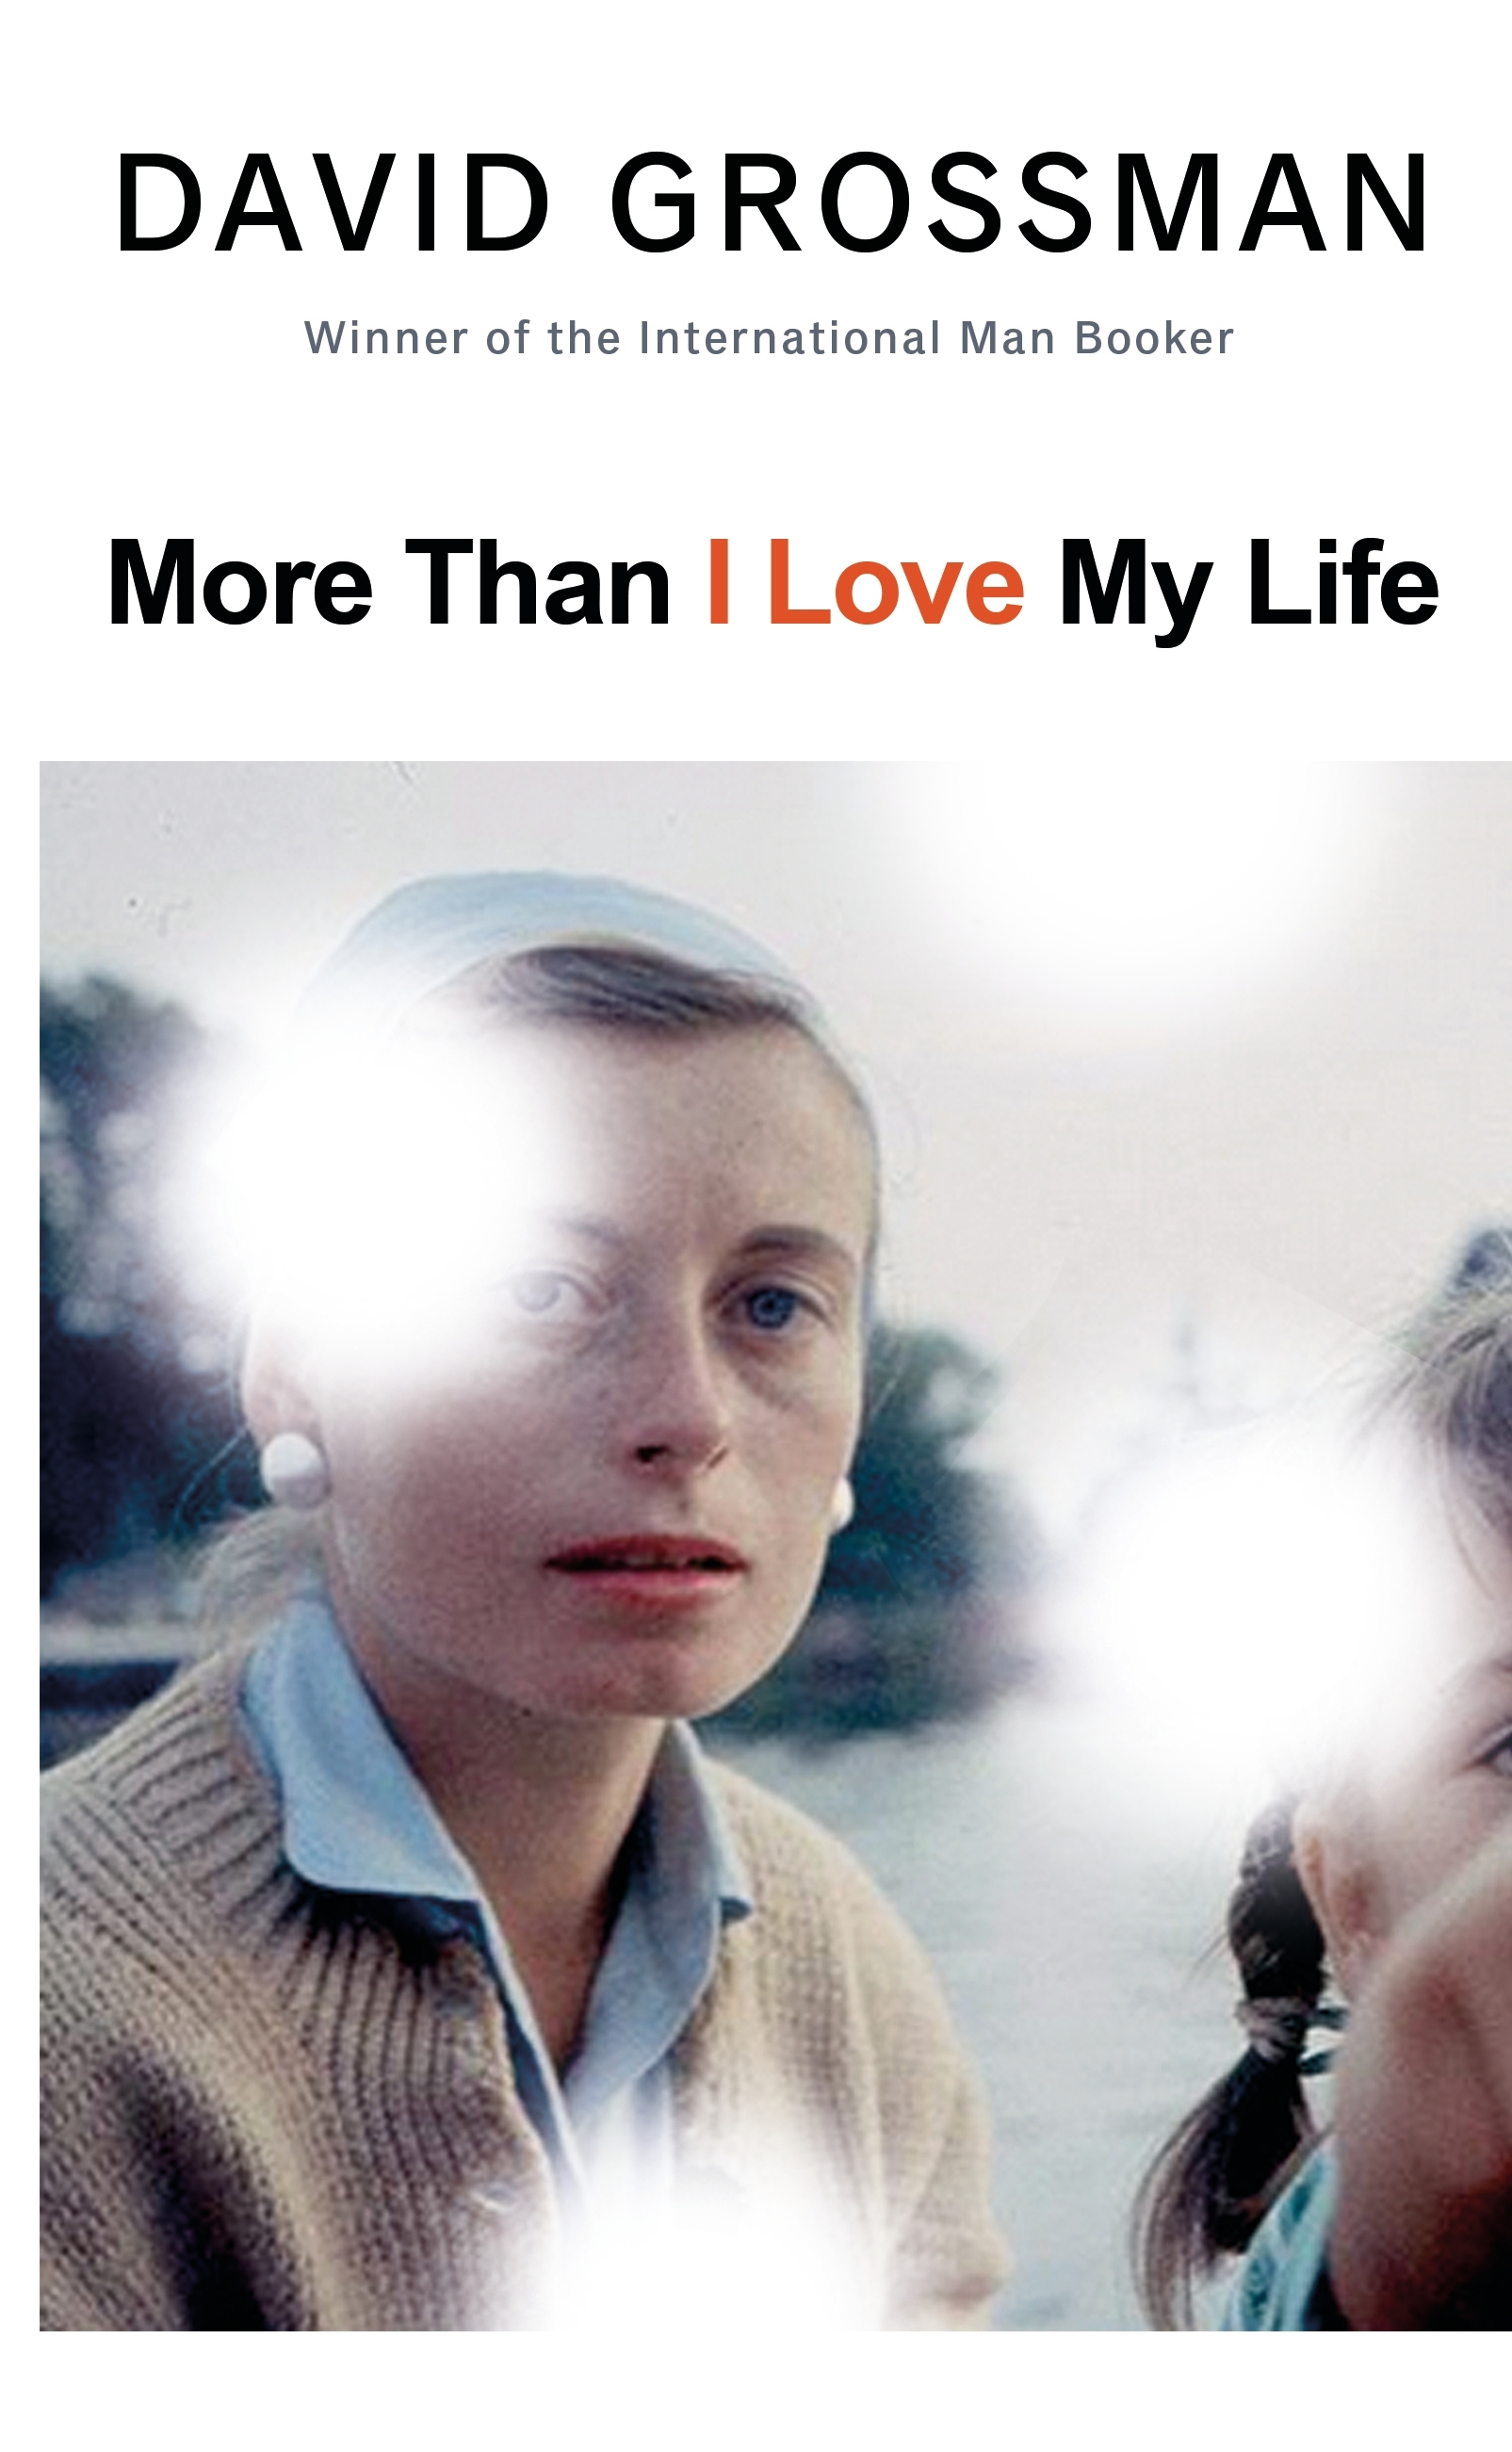 David Grossman, Jessica Cohen: More Than I Love My Life (2021, Knopf Doubleday Publishing Group)